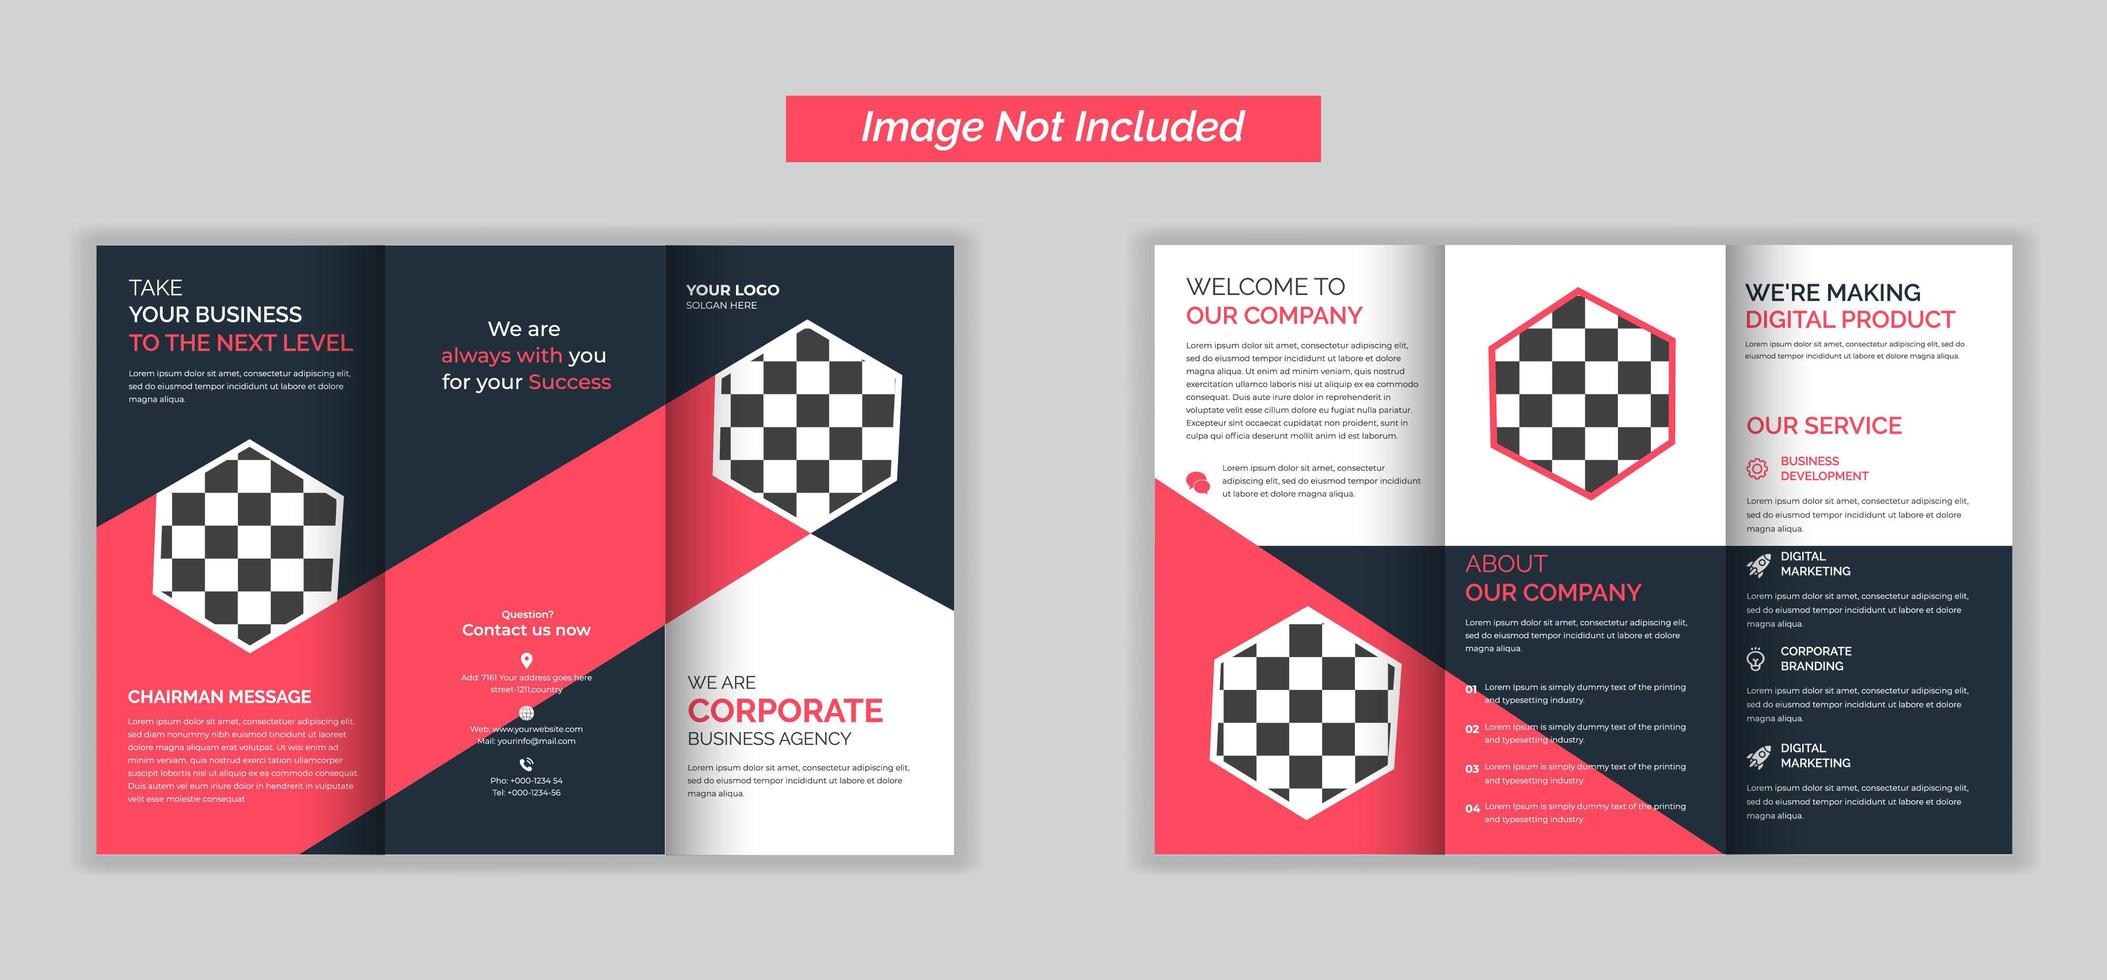 Corporate business agency trifold brochure with pink or red accent vector